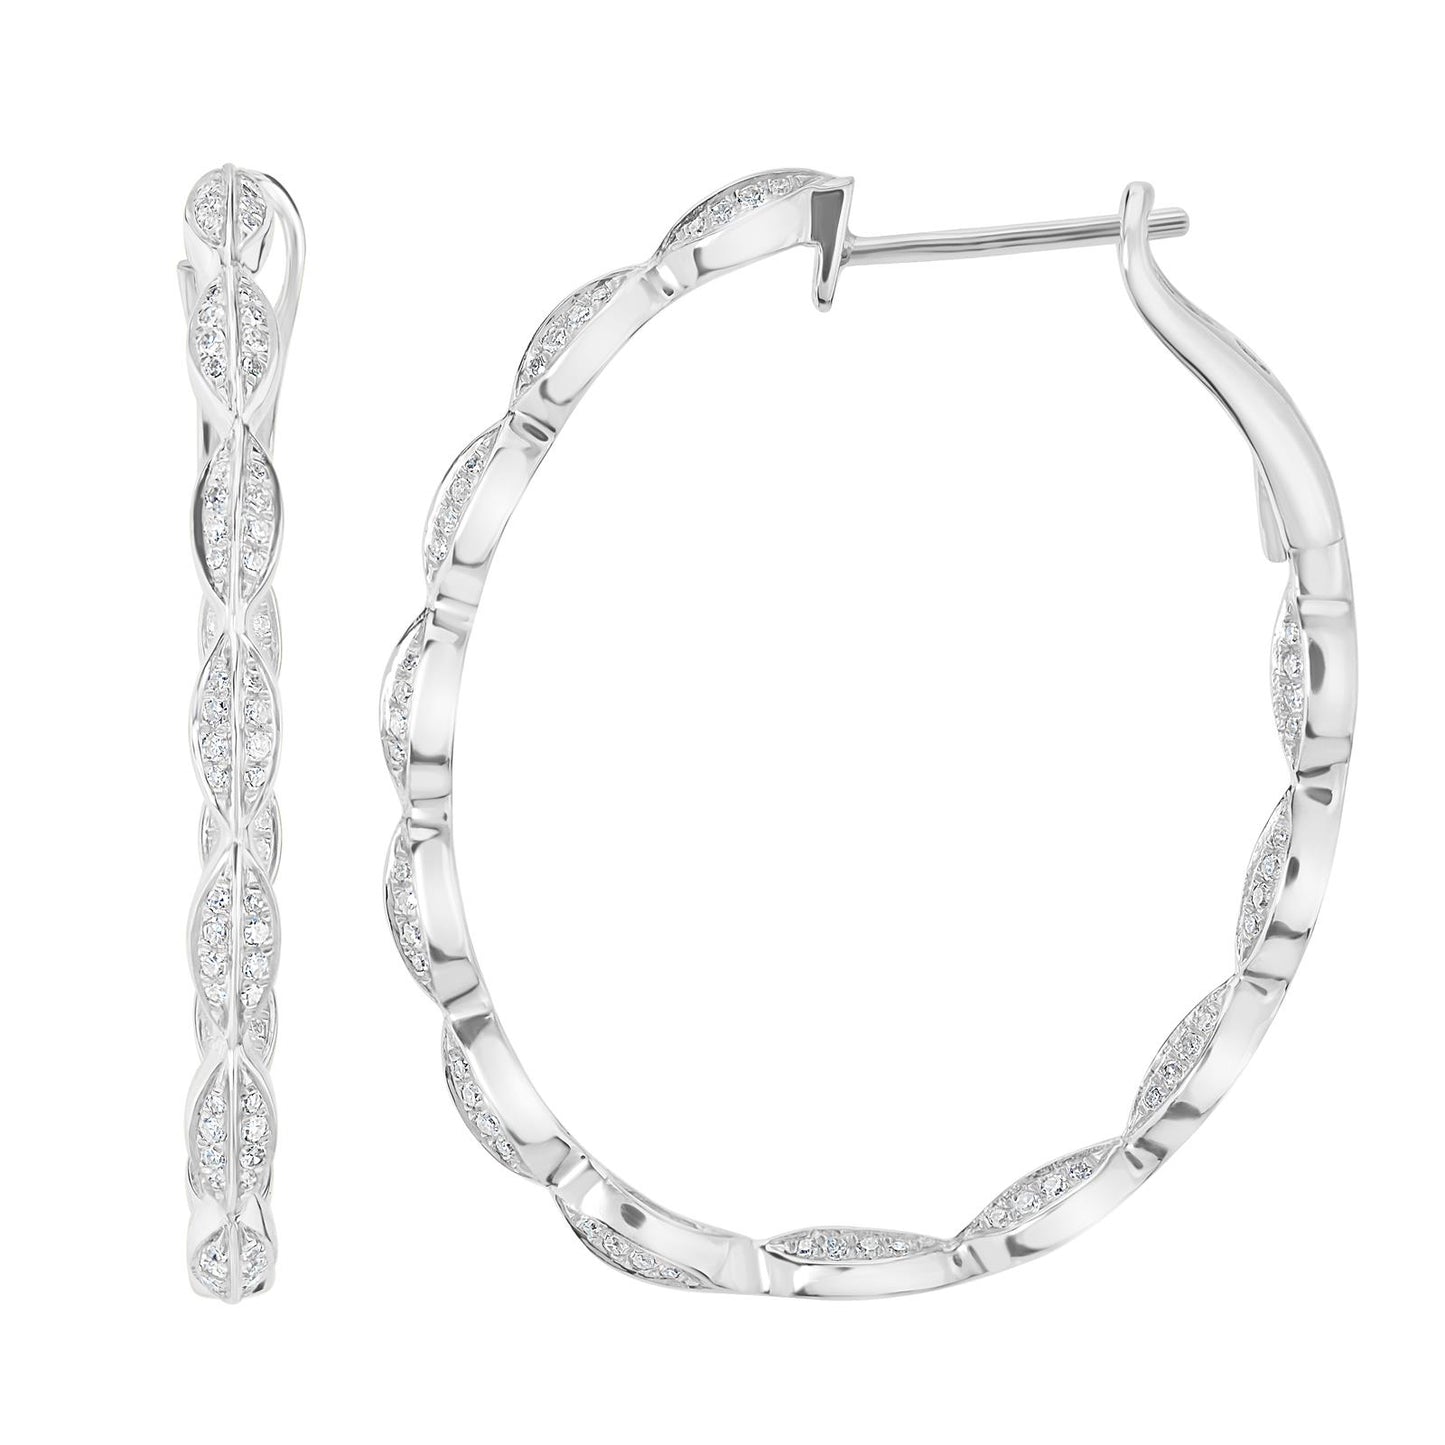 14K White Gold Diamond Hoops with Oval Stations